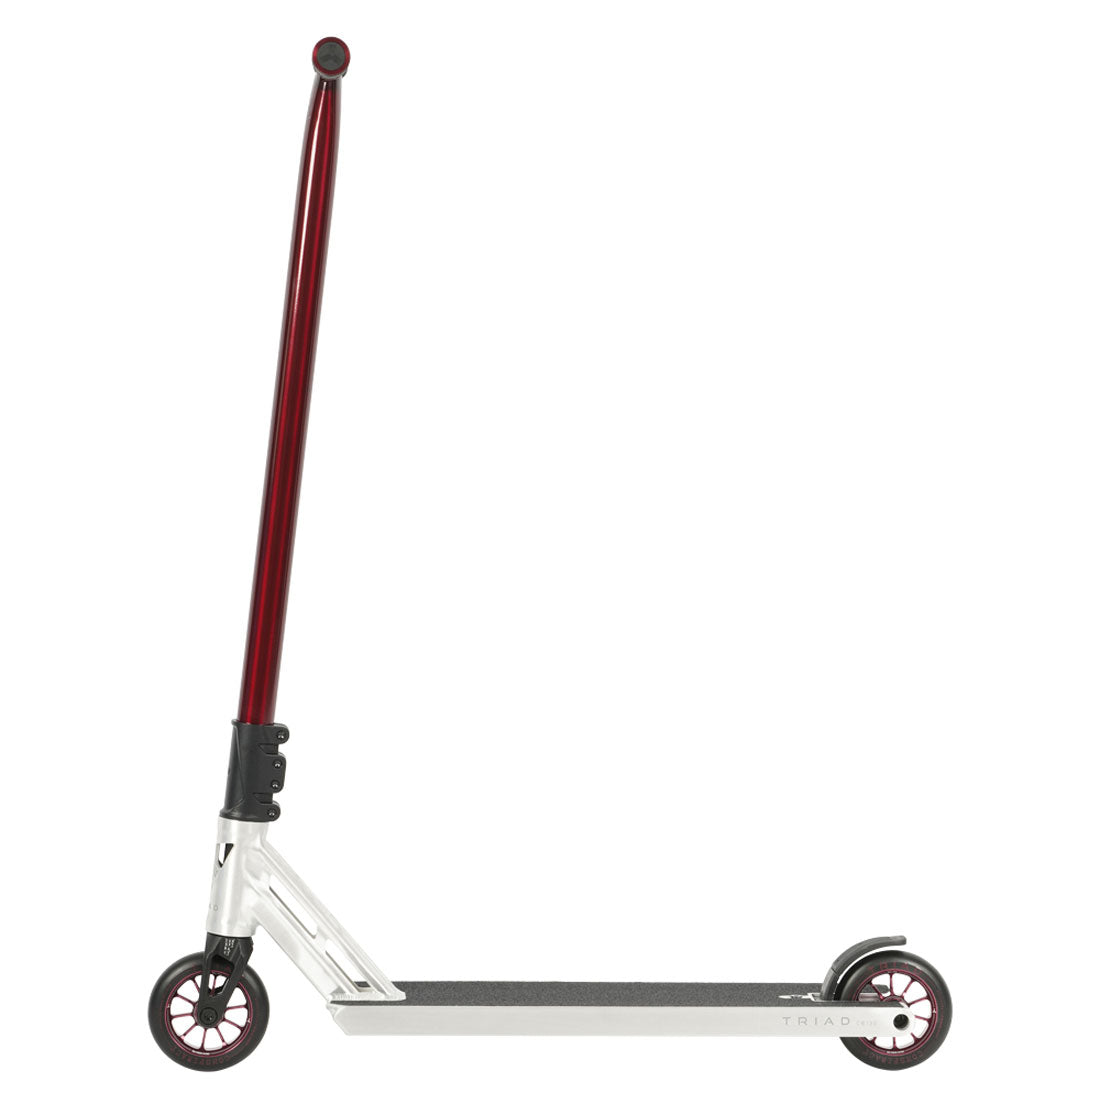 Triad CB140 Hellion Complete Scooter - Silver/Red Scooter Completes Trick